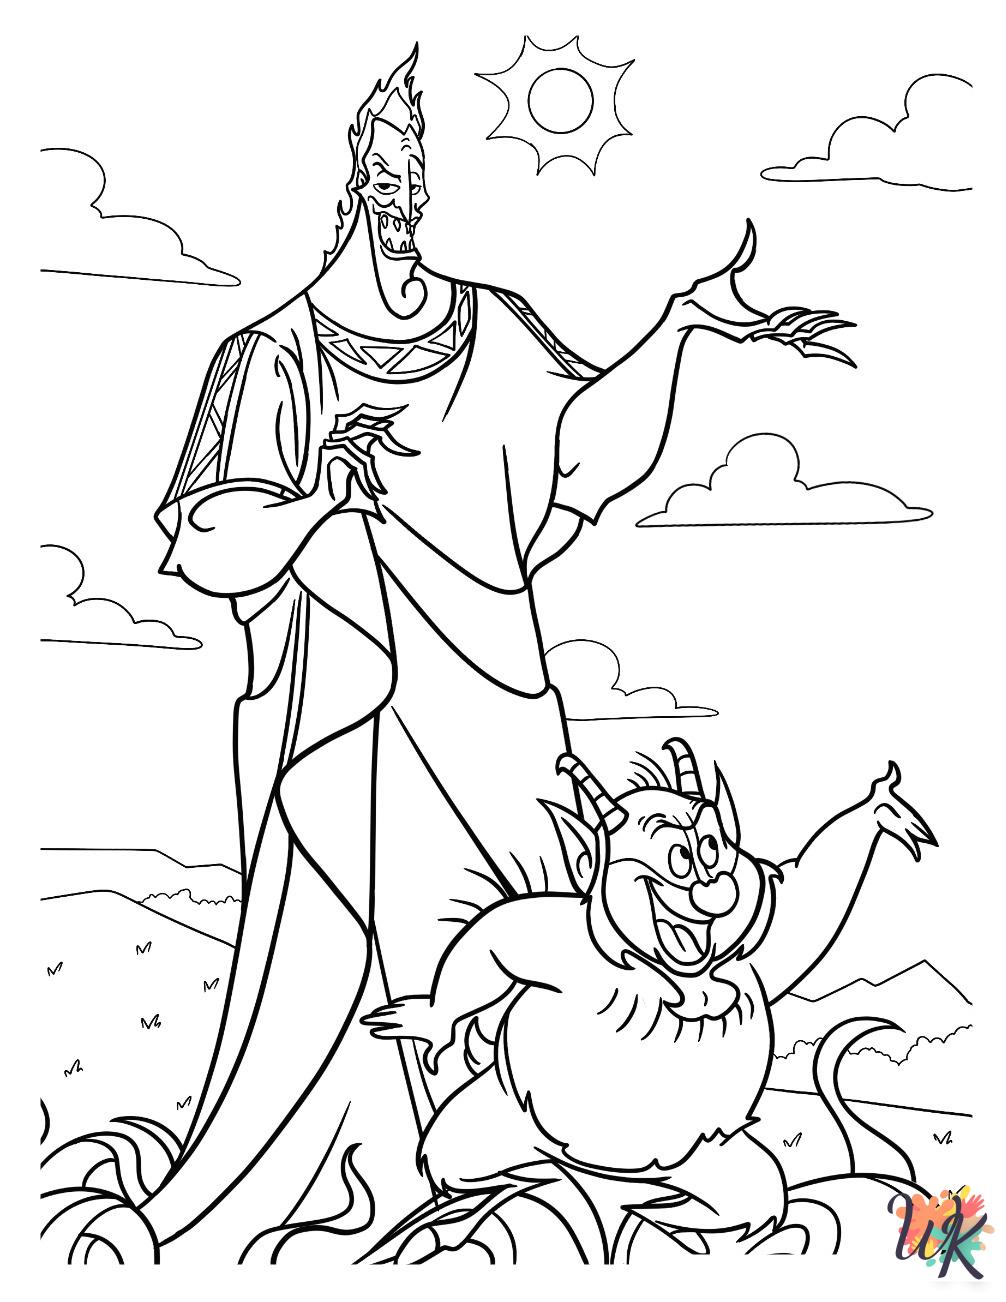 printable Hercules coloring pages for adults